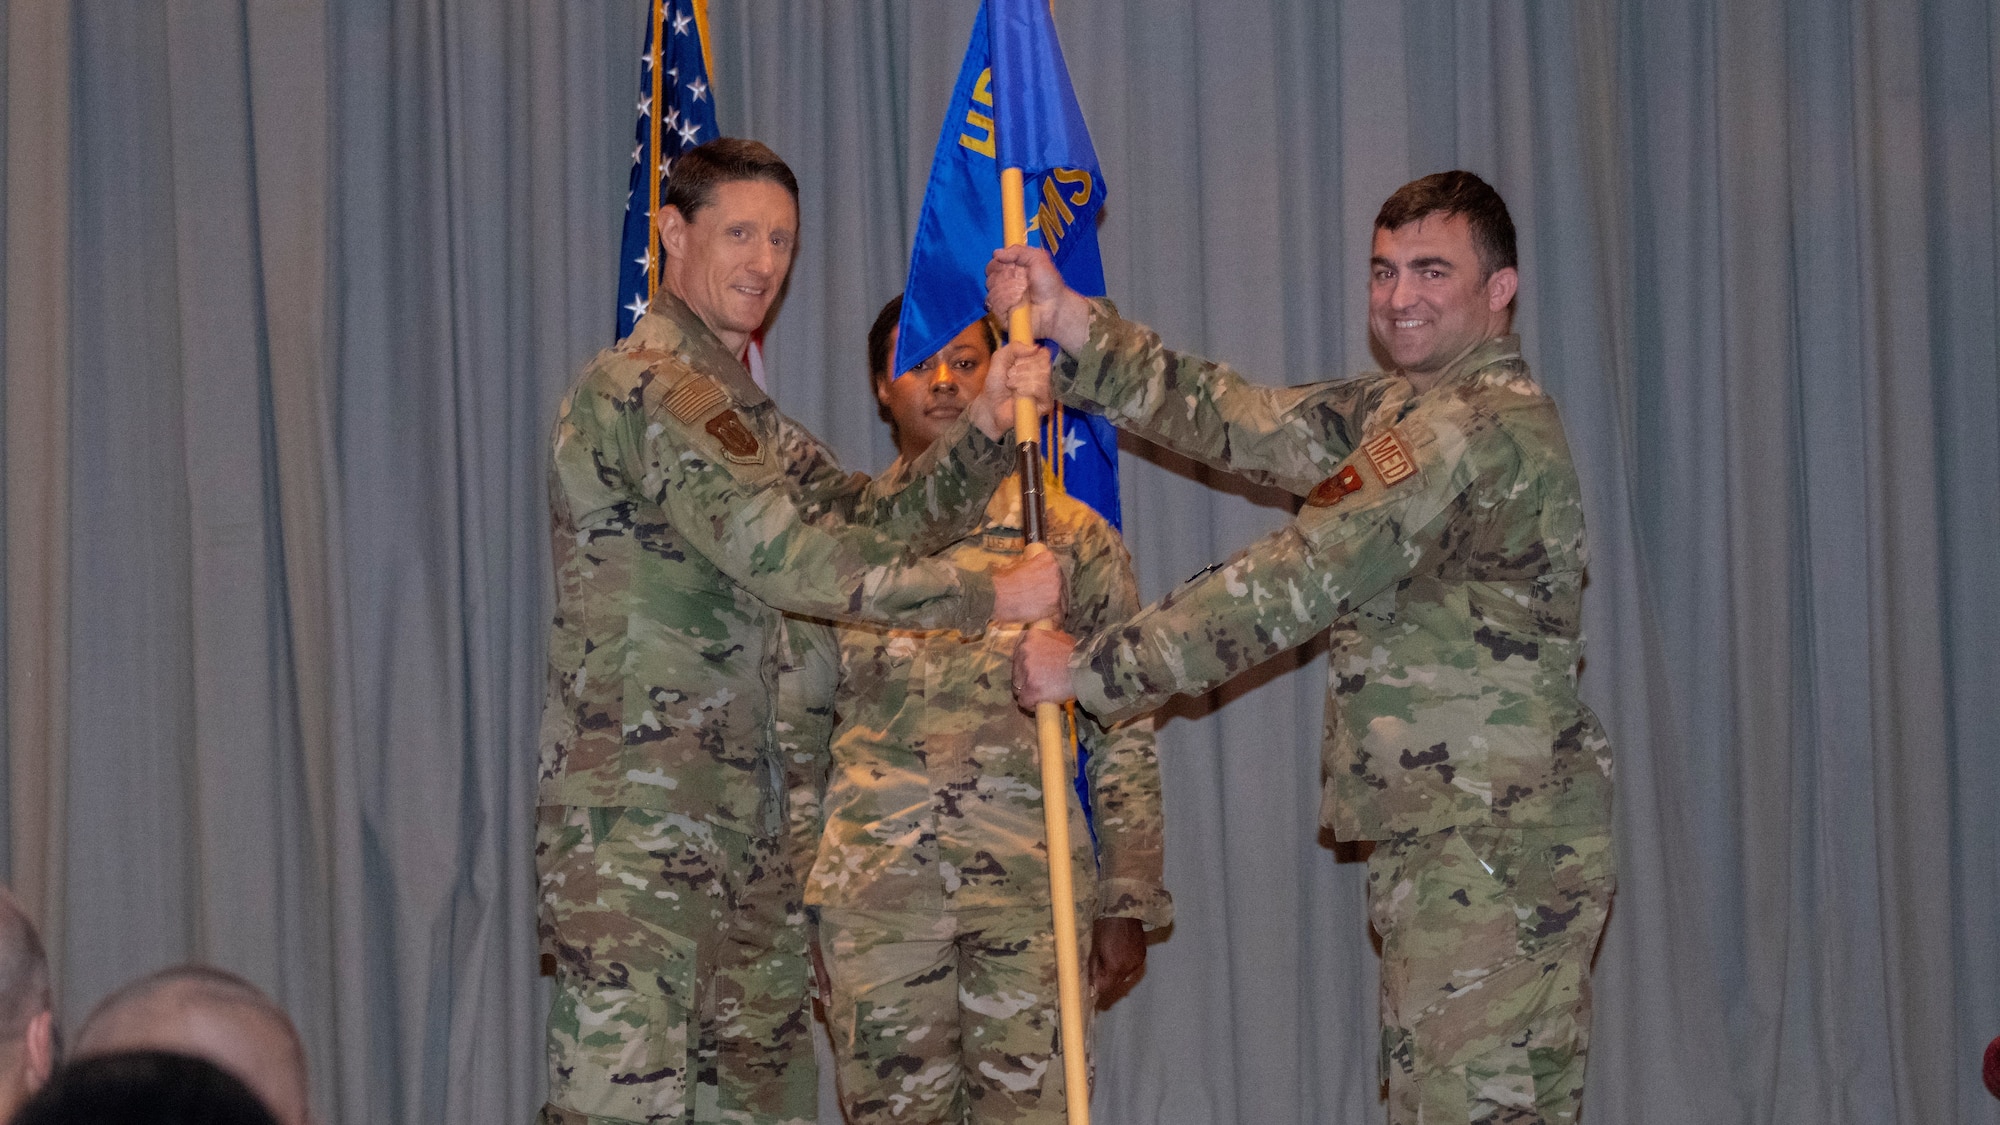 U.S. Air Force Col. George Buse (left), Special Warfare Human Performance Support Group commander and presiding officer, passes the guidon to Lt. Col. Gary D'Orazio (right), incoming Special Warfare Operational Medicine Squadron commander, during the SWOMS change of command ceremony at Joint Base San Antonio-Chapman Training Annex, Texas, July 15, 2022.